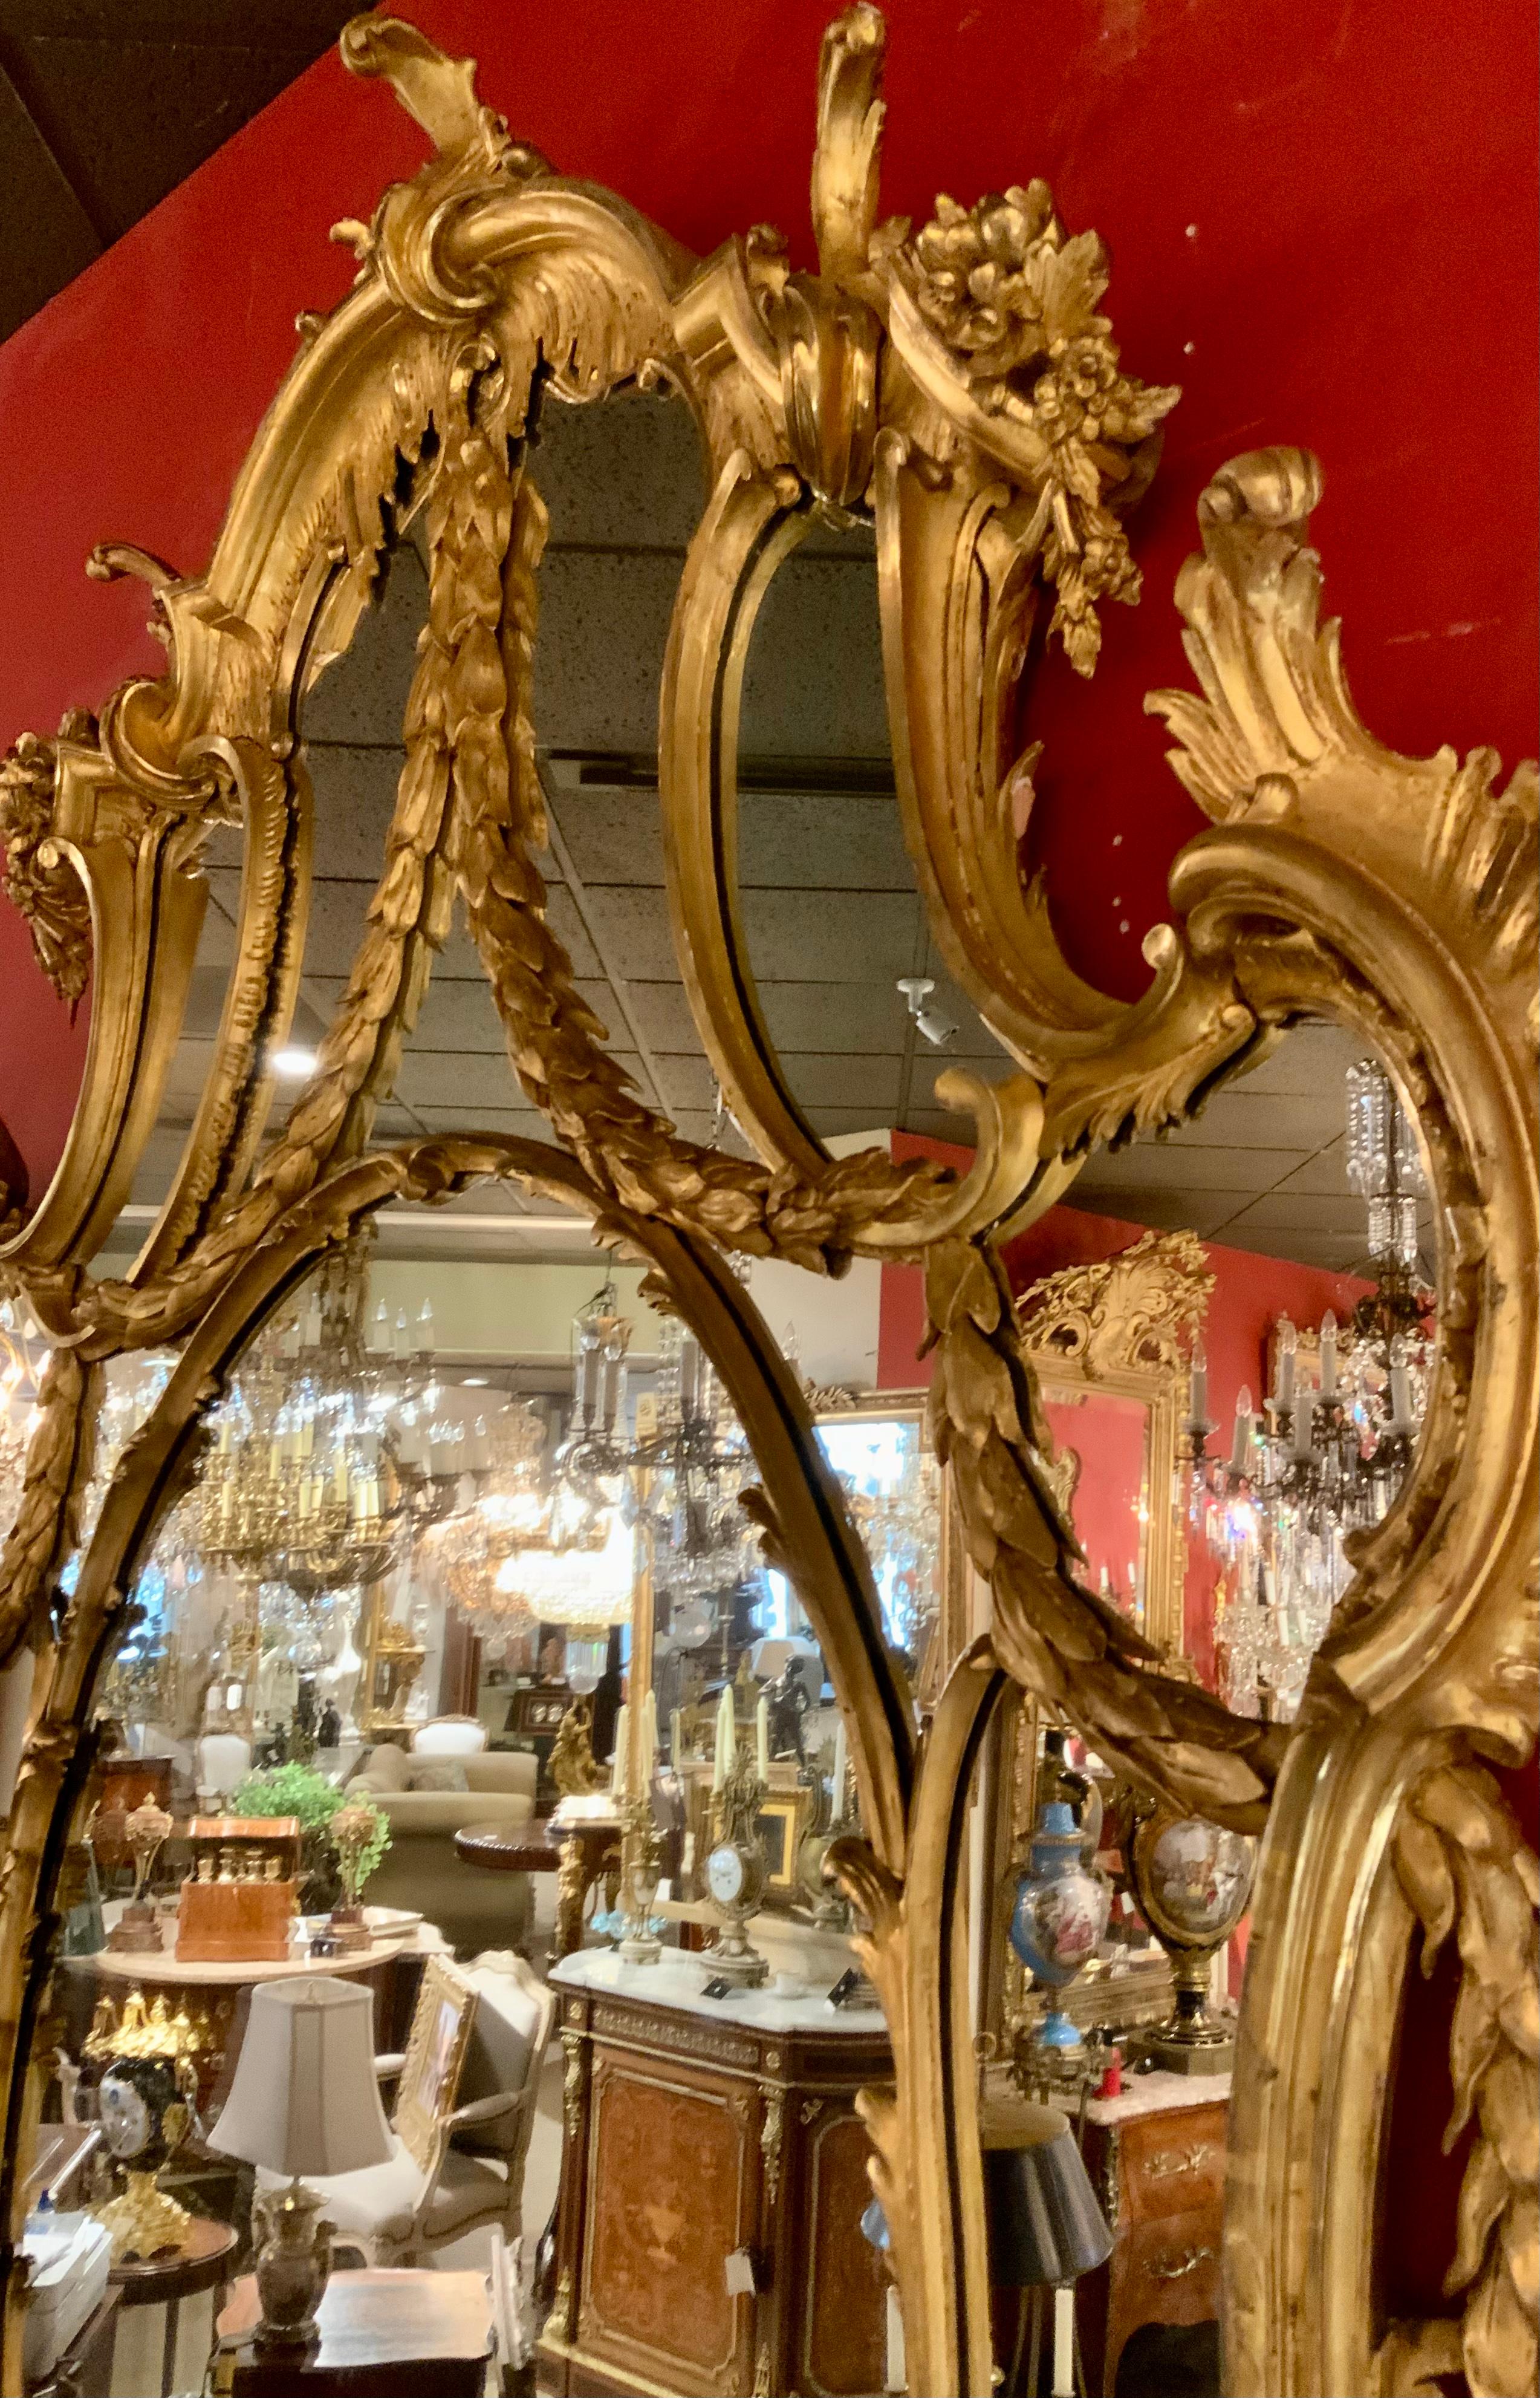 British Large Giltwood Chinese Chippendale Mirror, George III Style, 18th Century